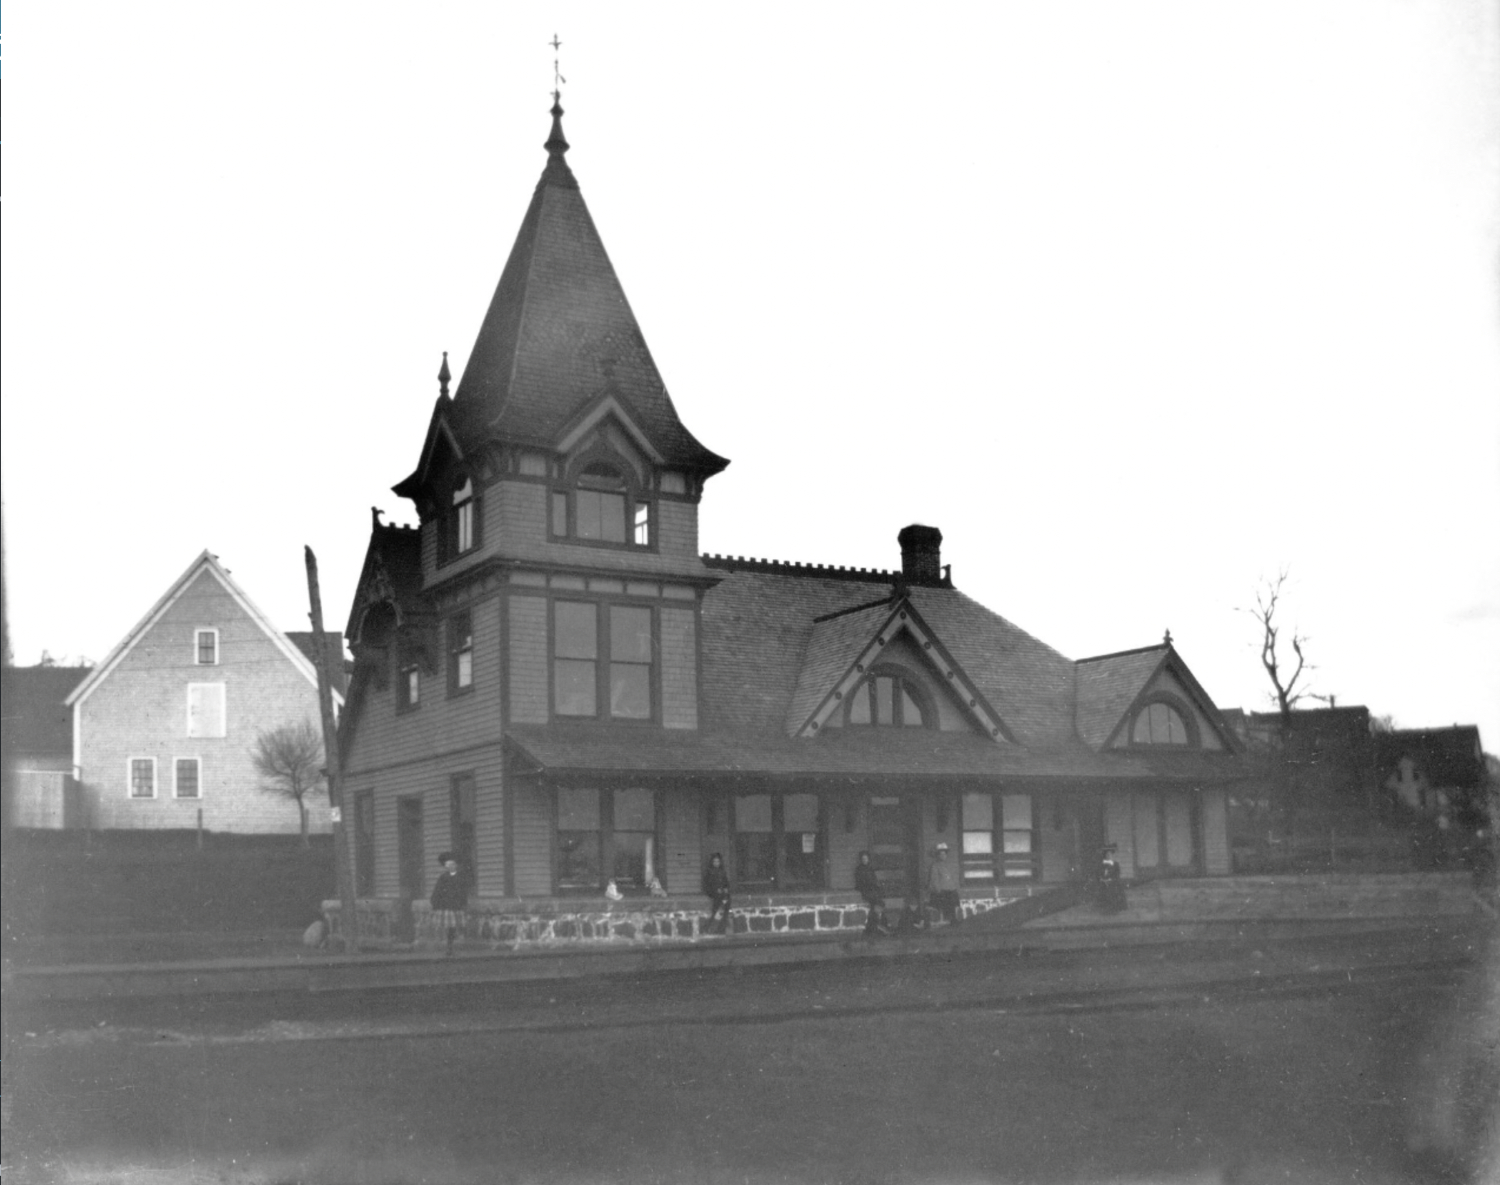 Archival B&W photo of an old train station.